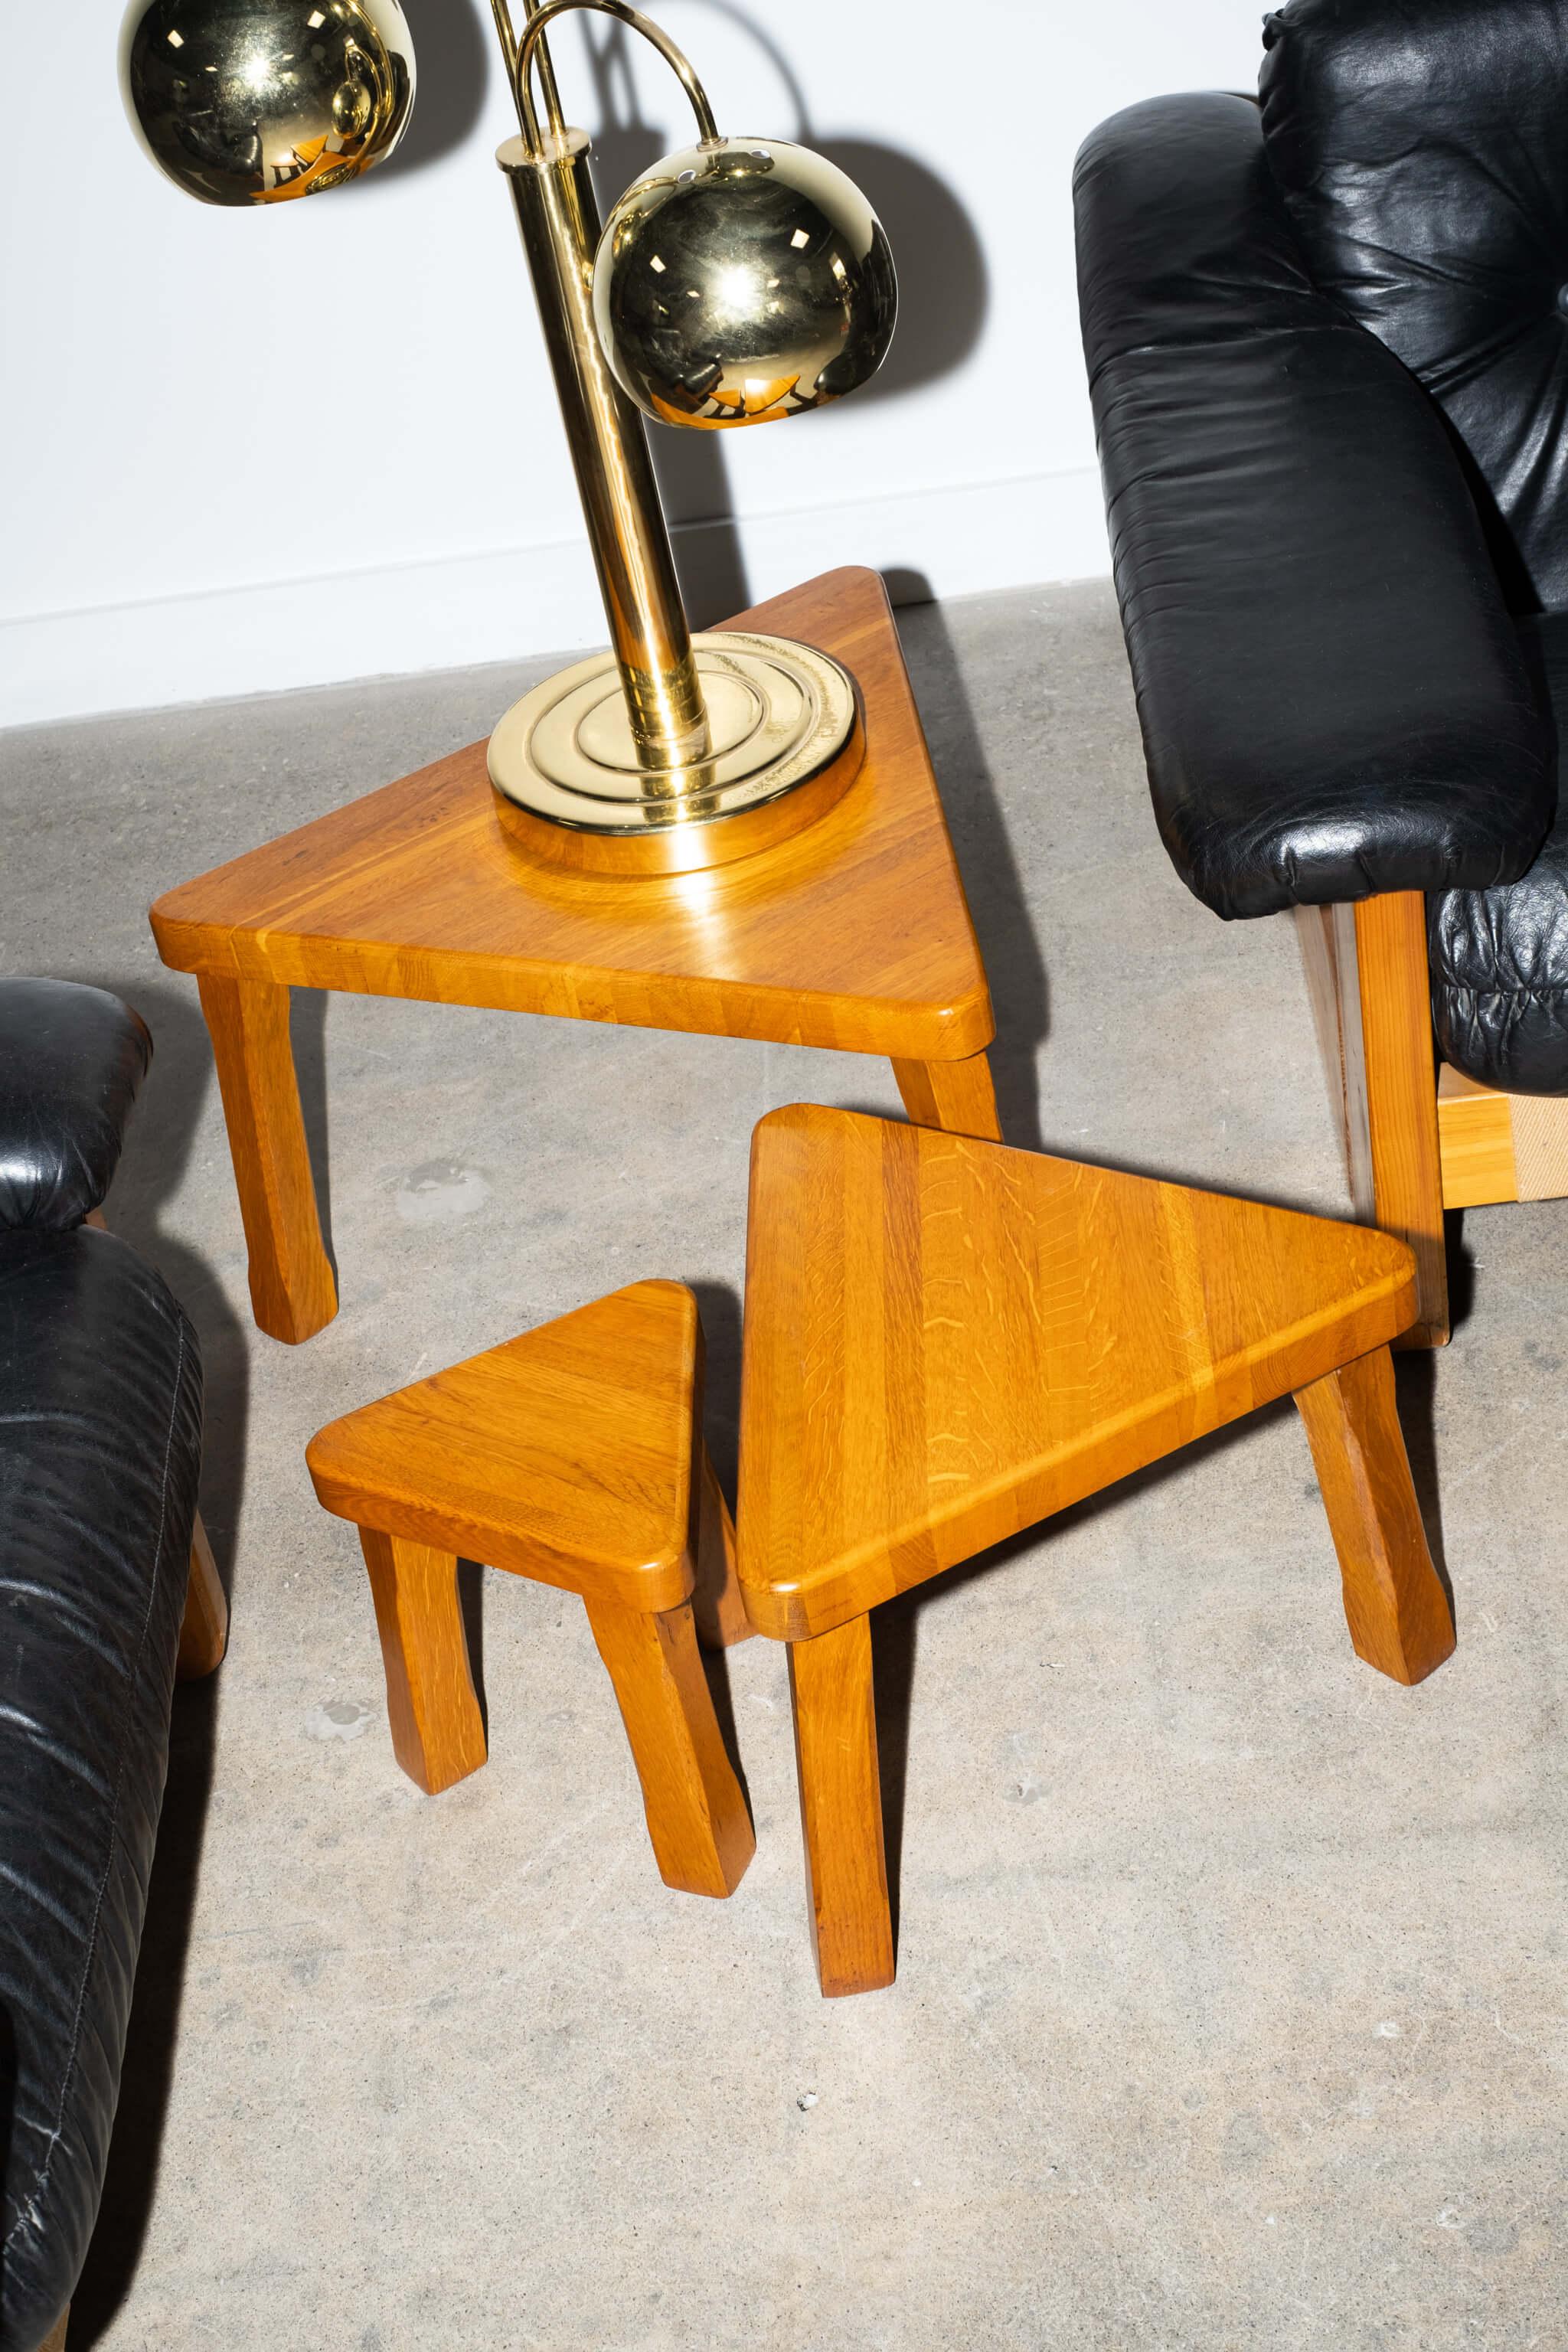 A set of three triangular-shaped nesting tables in a warm solid oak, on sturdy tripod legs. 1950s, in the style of French master Pierre Chapo - whose passion for wood and modernist designs were heavily focused on craftsmanship. Useful, elegant and